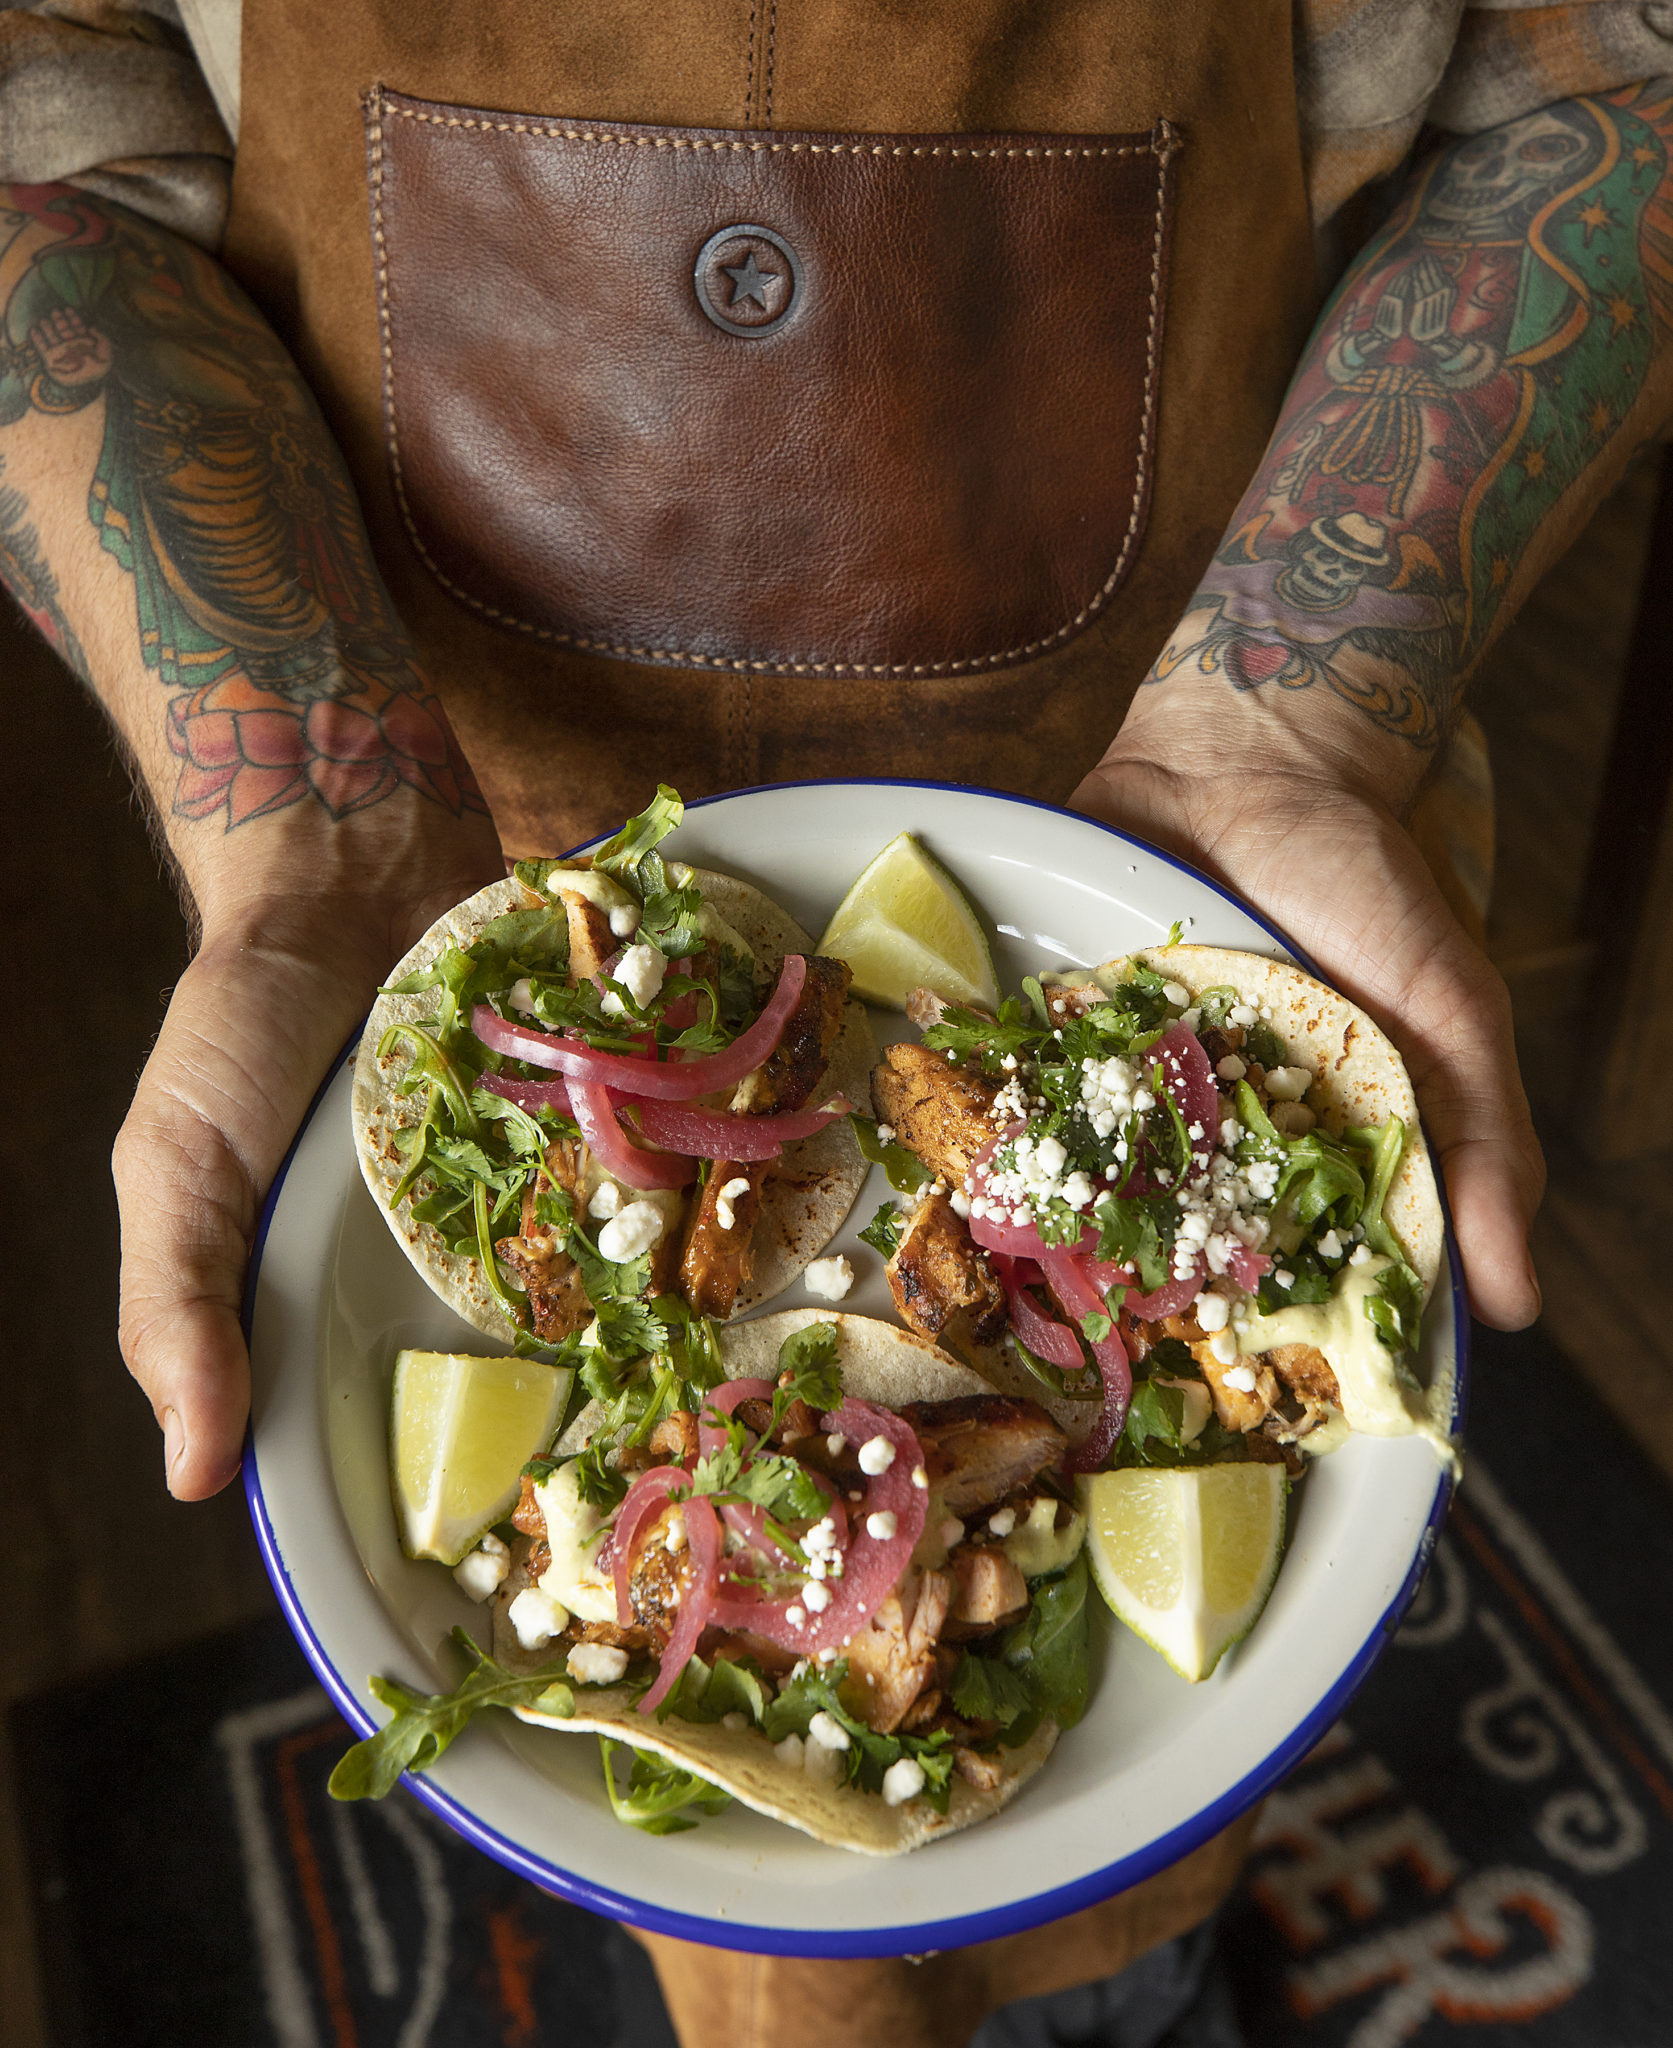 Piri Piri Chicken Street Tacos with Portuguese fire-grilled chicken thighs, arugula, Piri Piri sauce and goat cheese from the Butcher Crown Roadhouse in Petaluma. (photo by John Burgess/The Press Democrat)